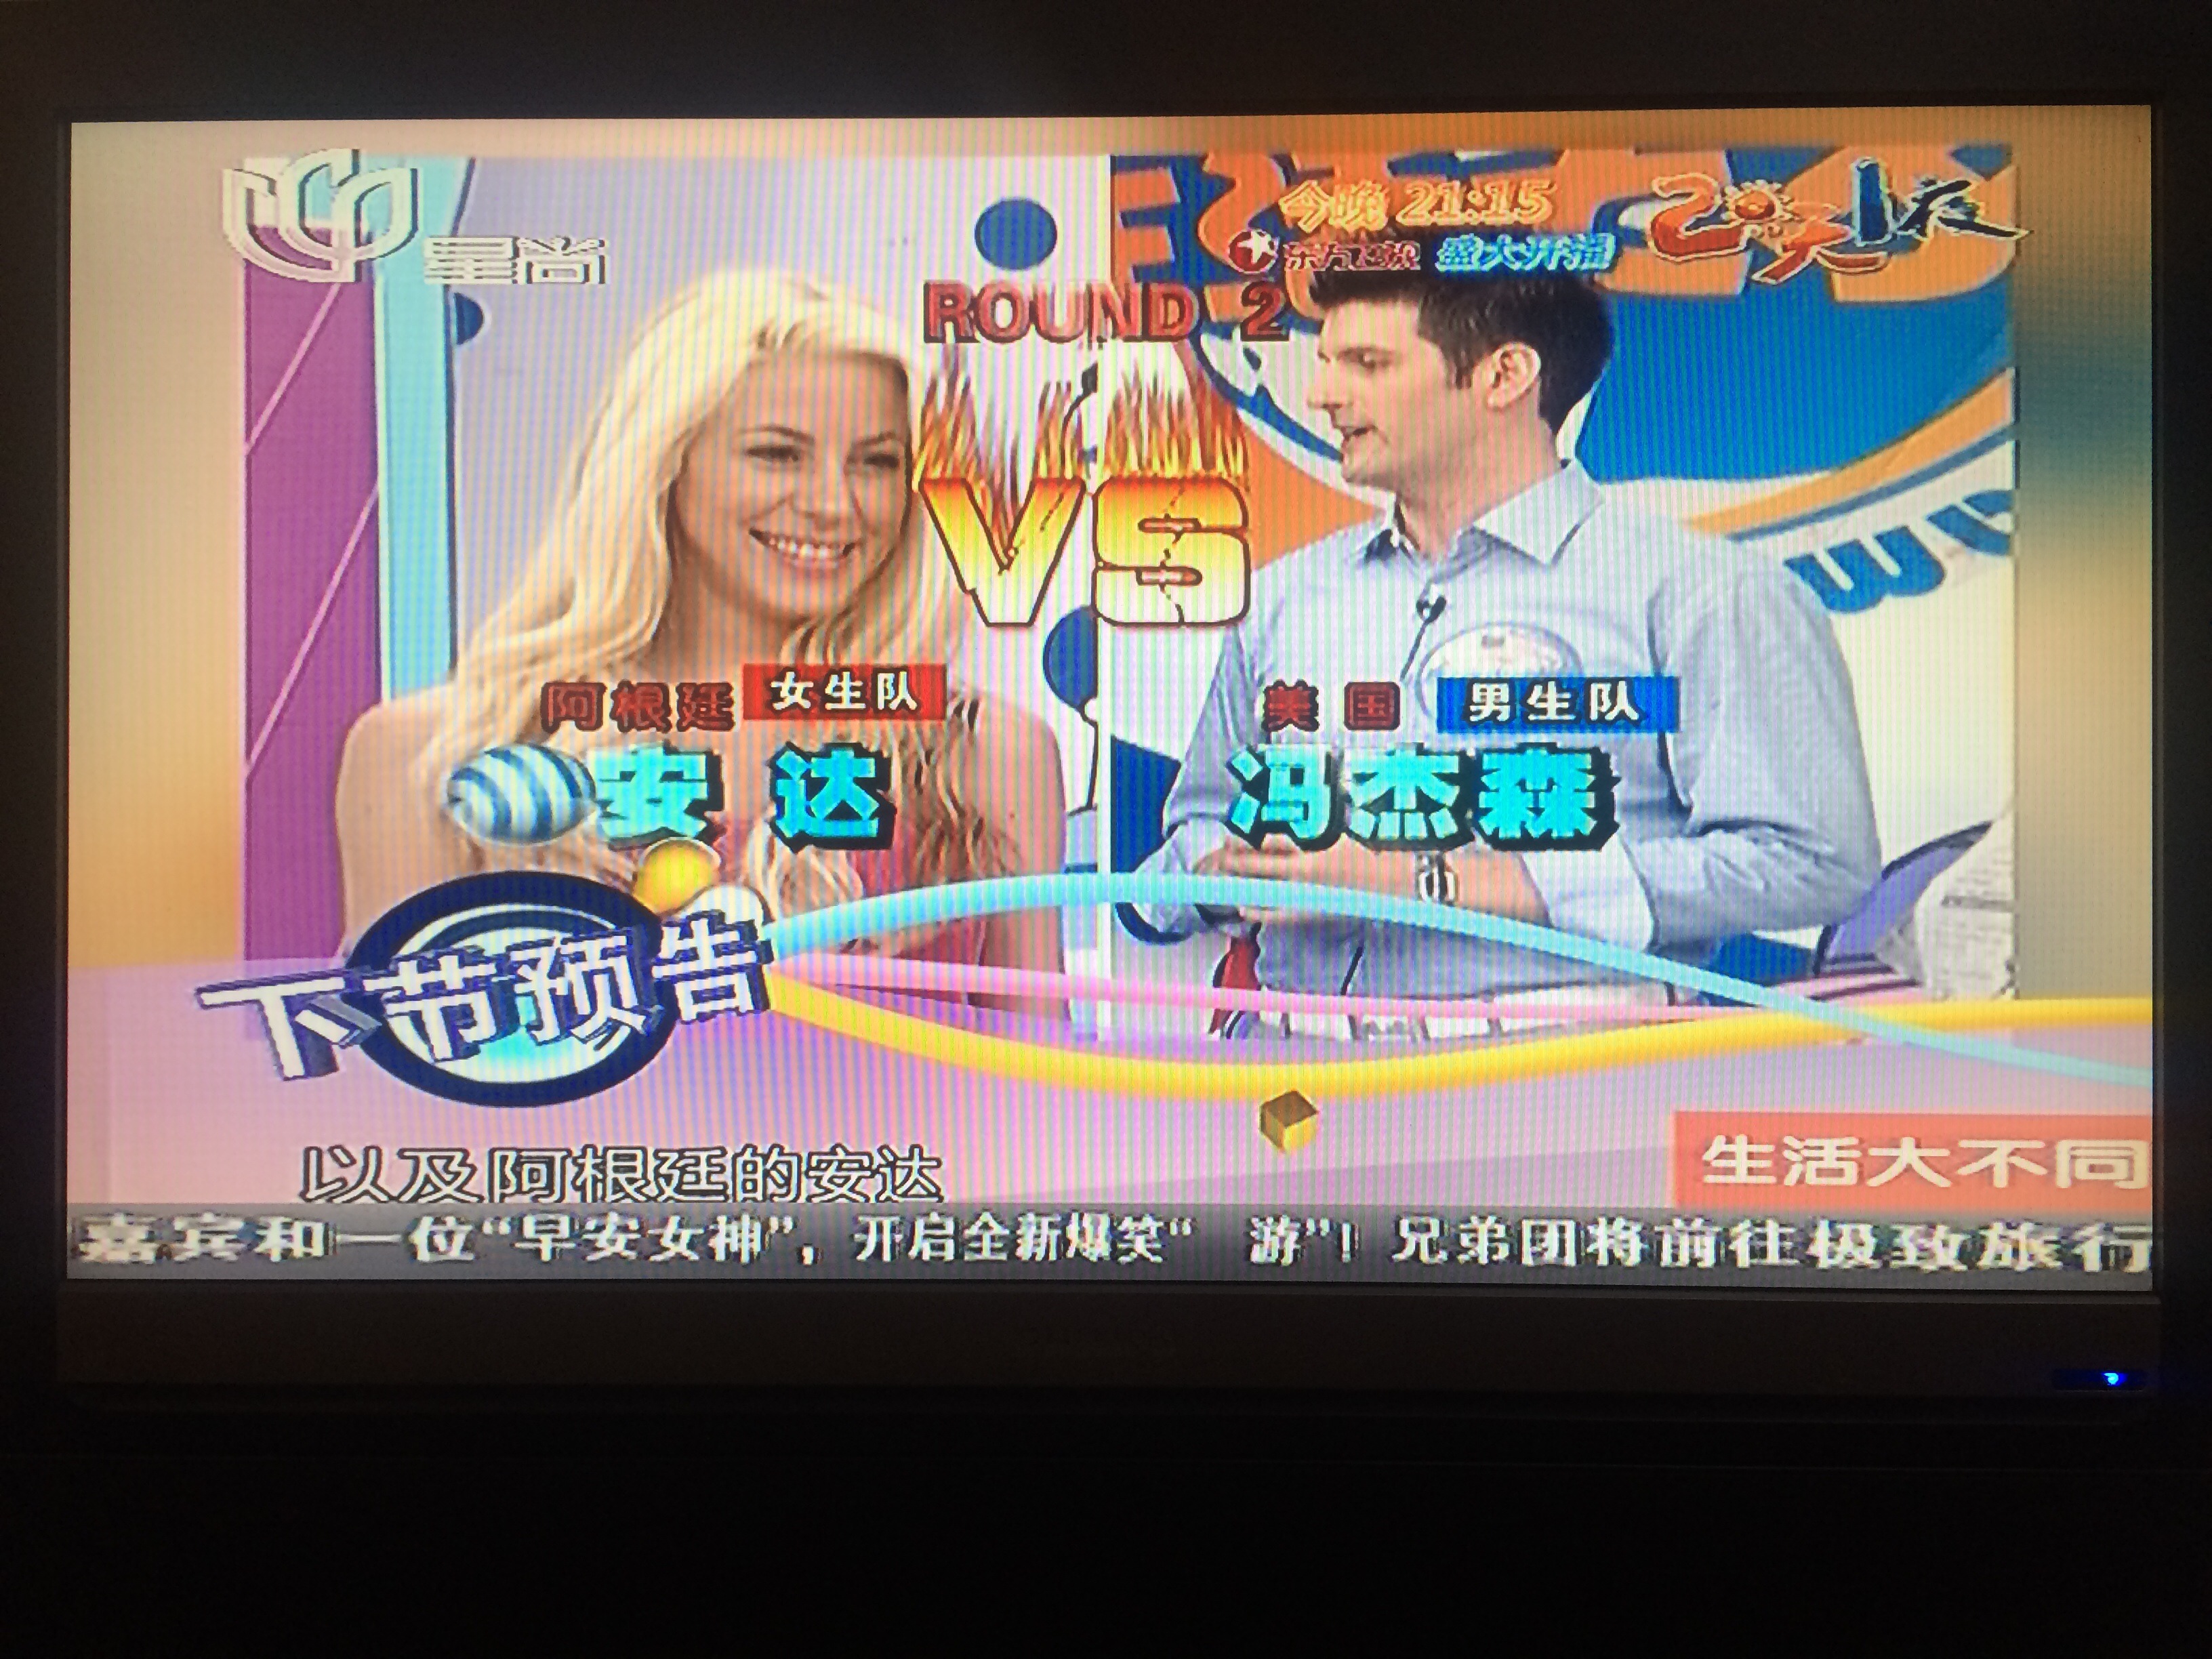 TV time . Every Friday night in China Television